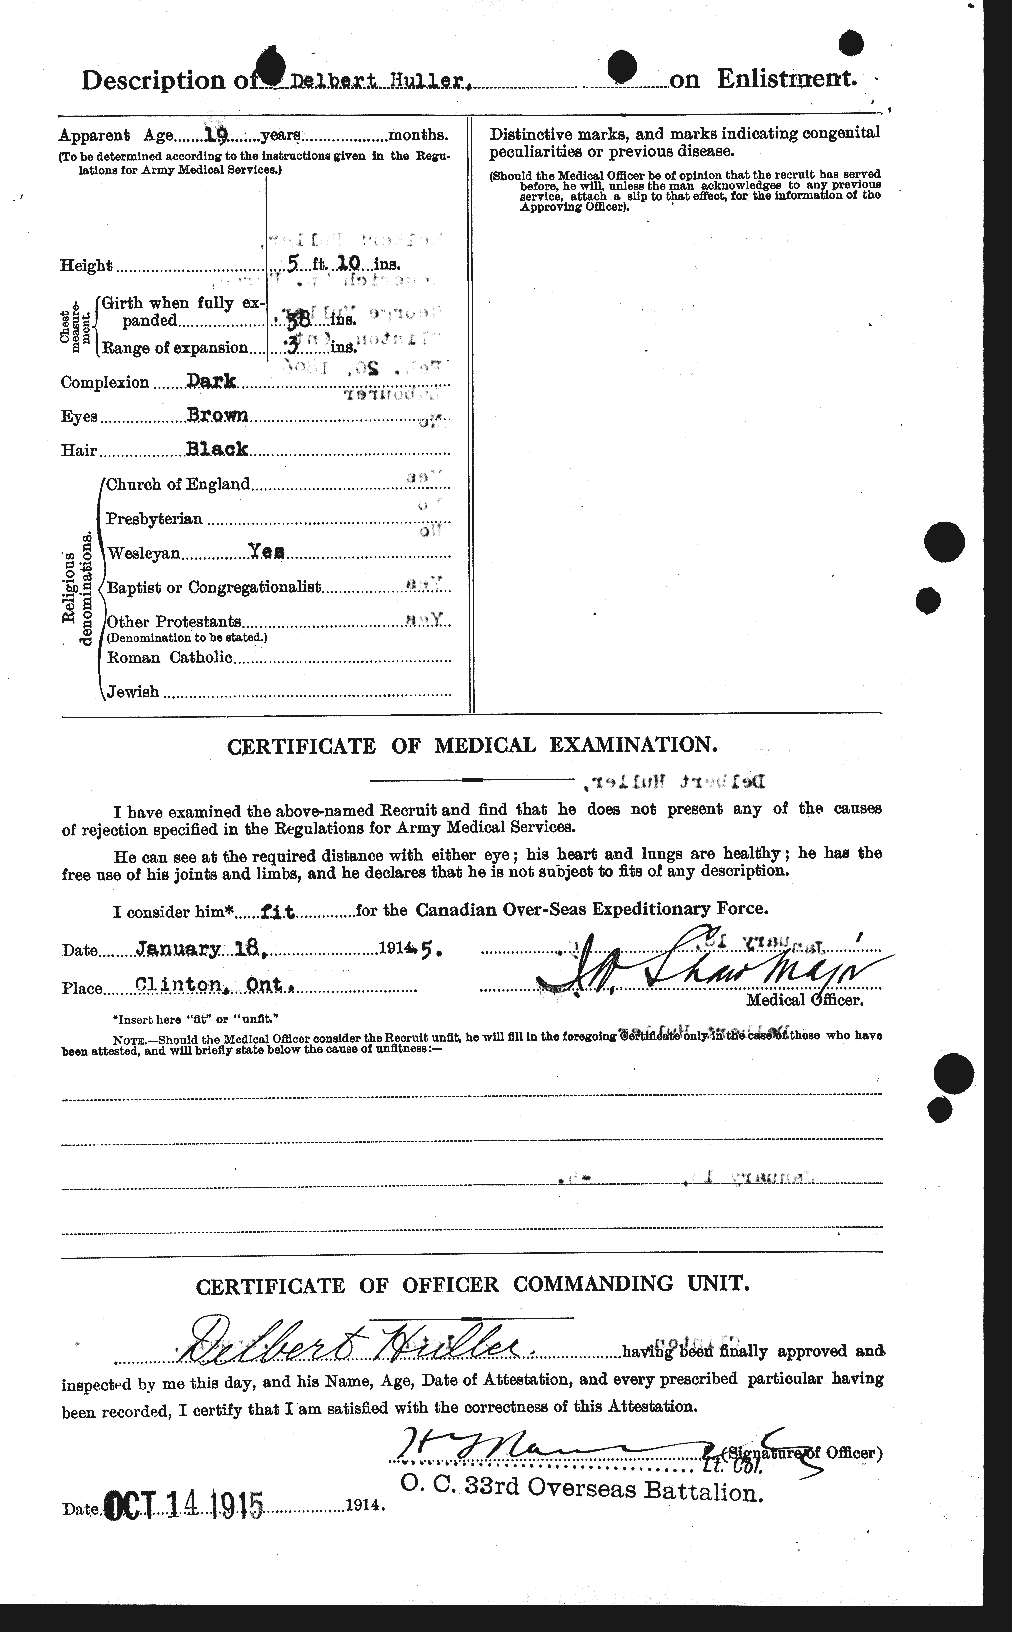 Personnel Records of the First World War - CEF 406182b